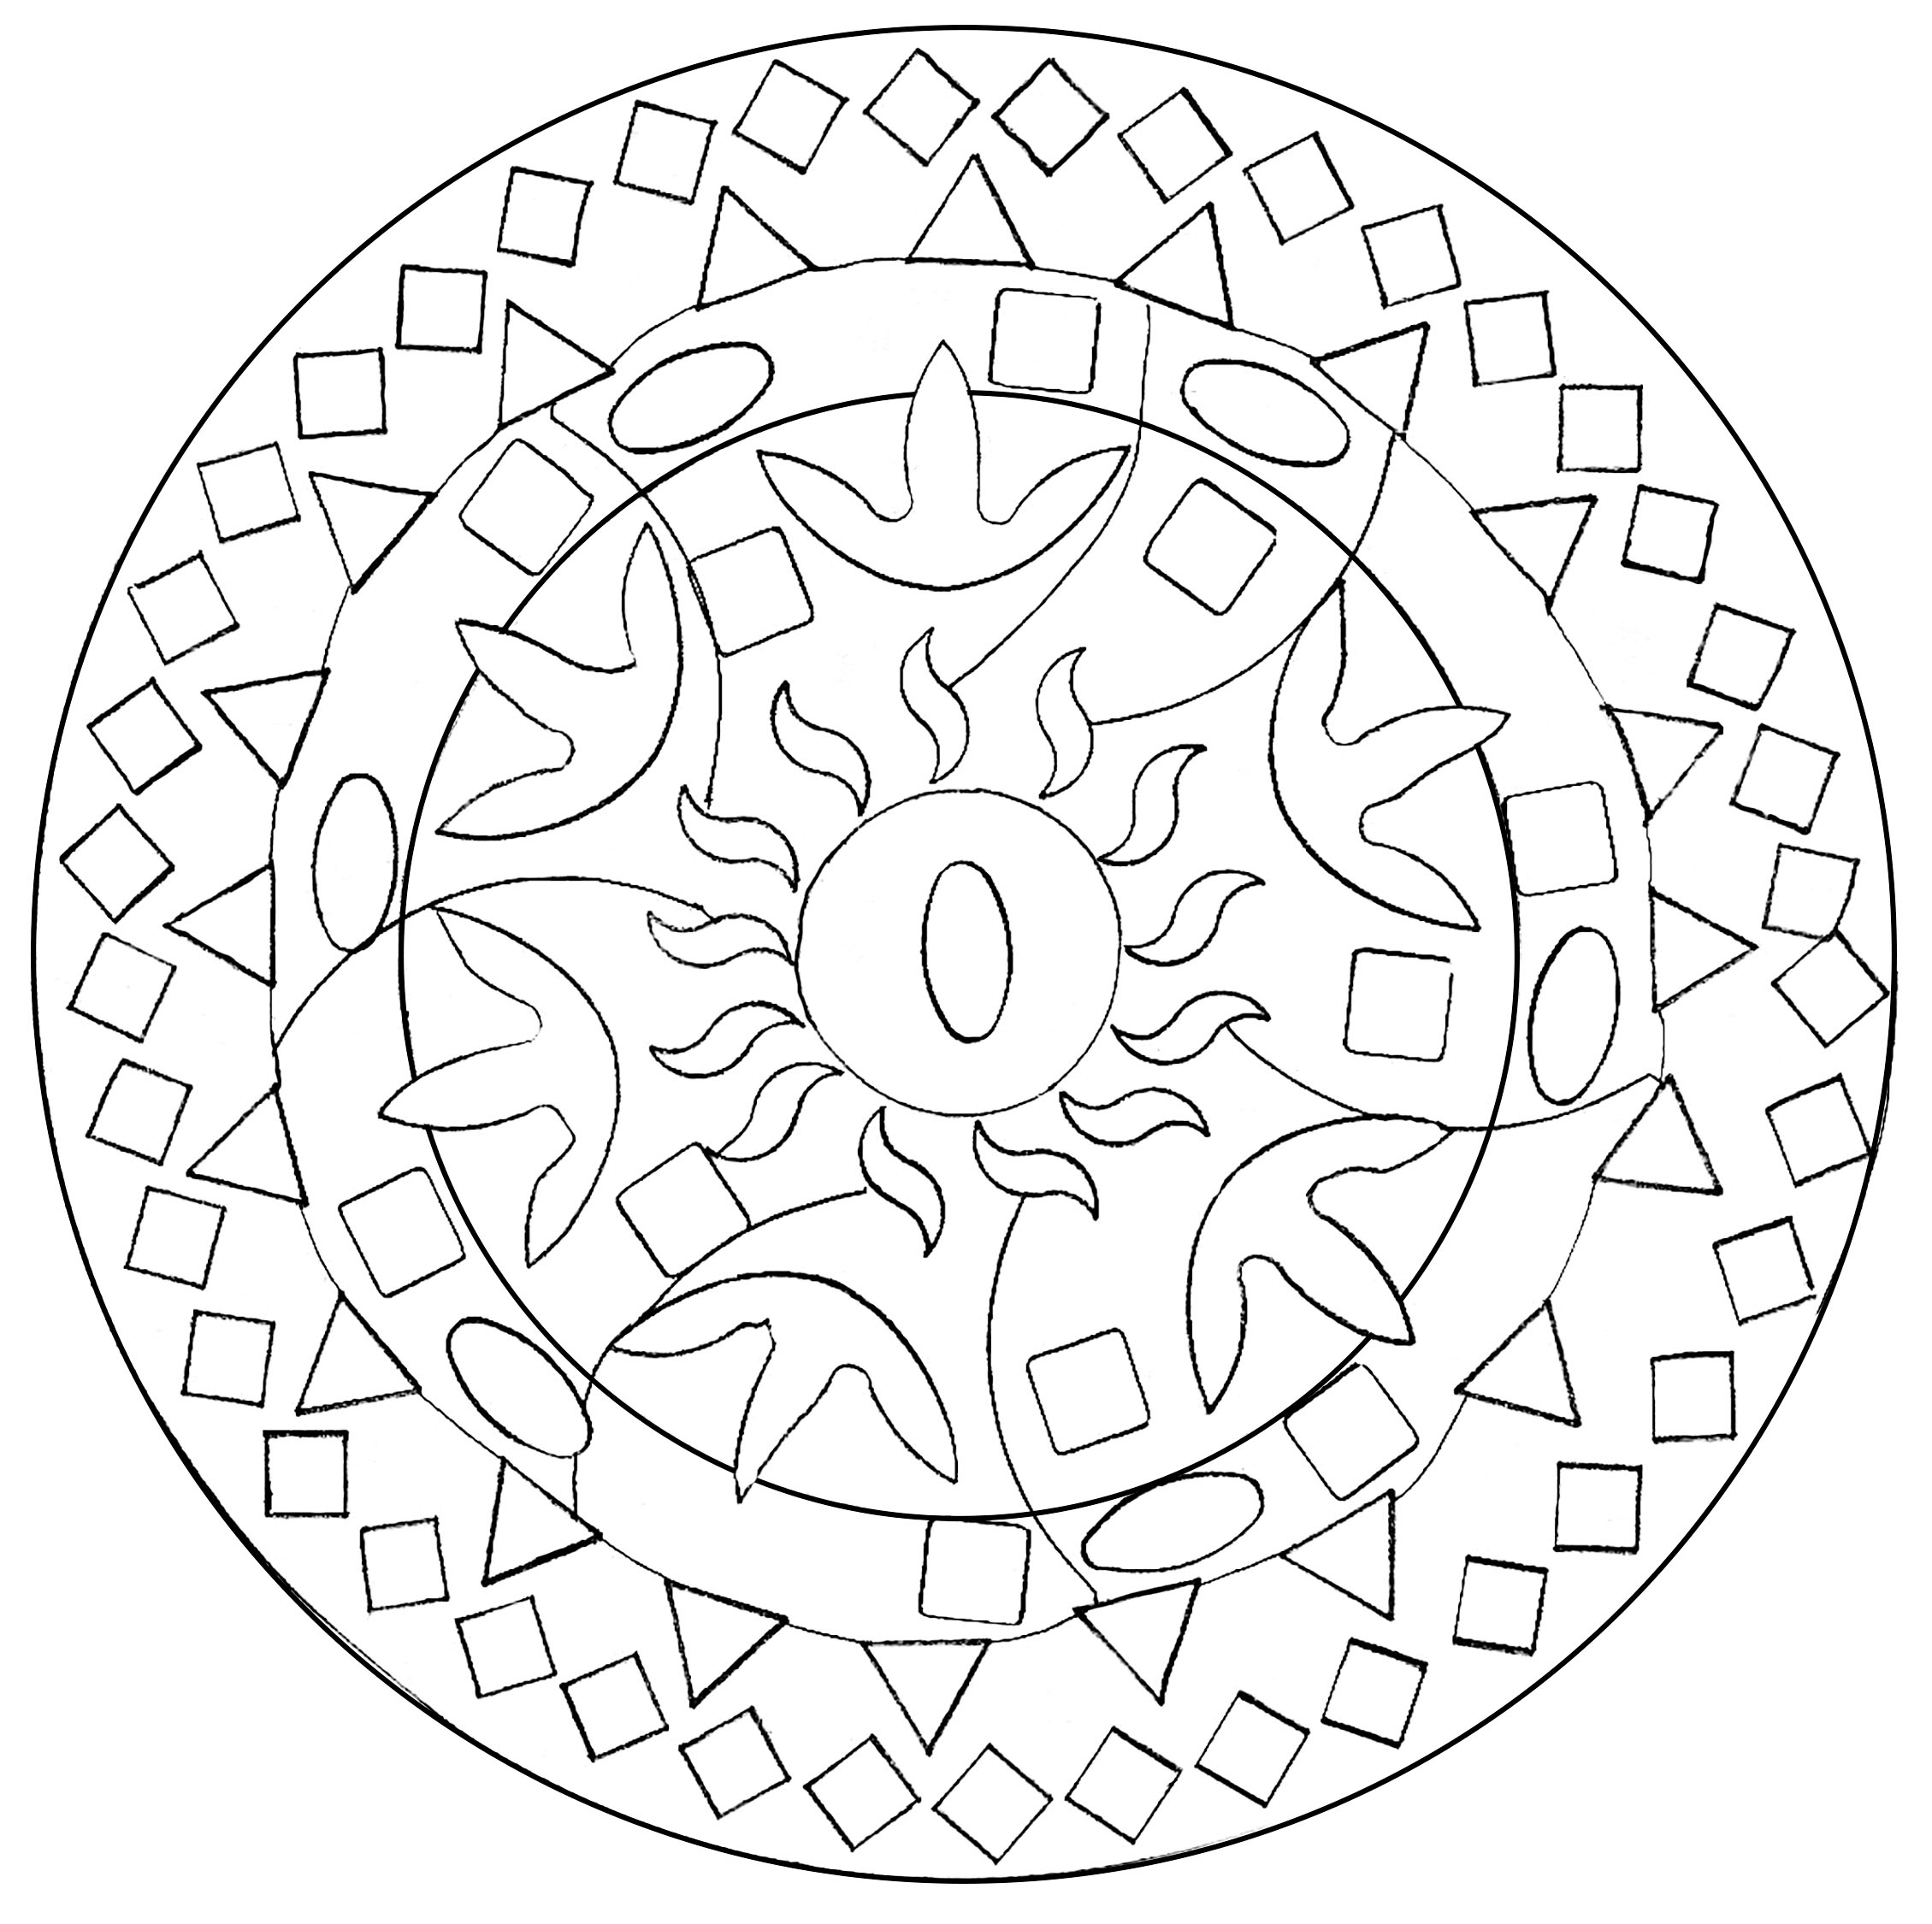 Download Easy abstract mandala - M&alas Adult Coloring Pages